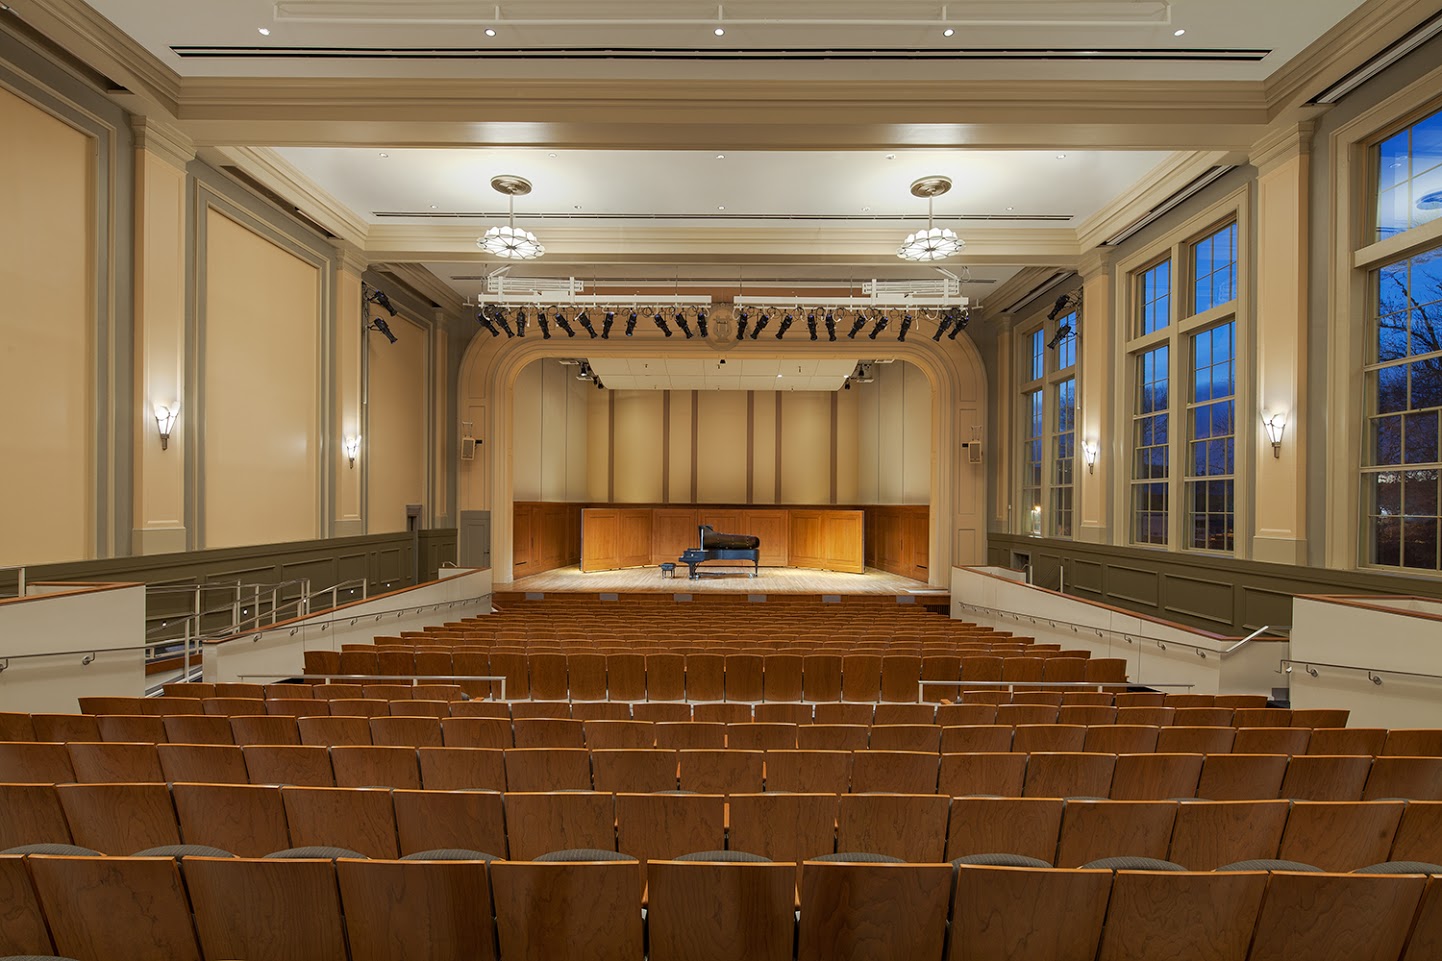 Moeser Auditorium, as seen from the back of the seats. The auditorium is empty, the lights are bright with a lone grand piano on the stage and the deep blue sky of twilight visible through the windows to the right.